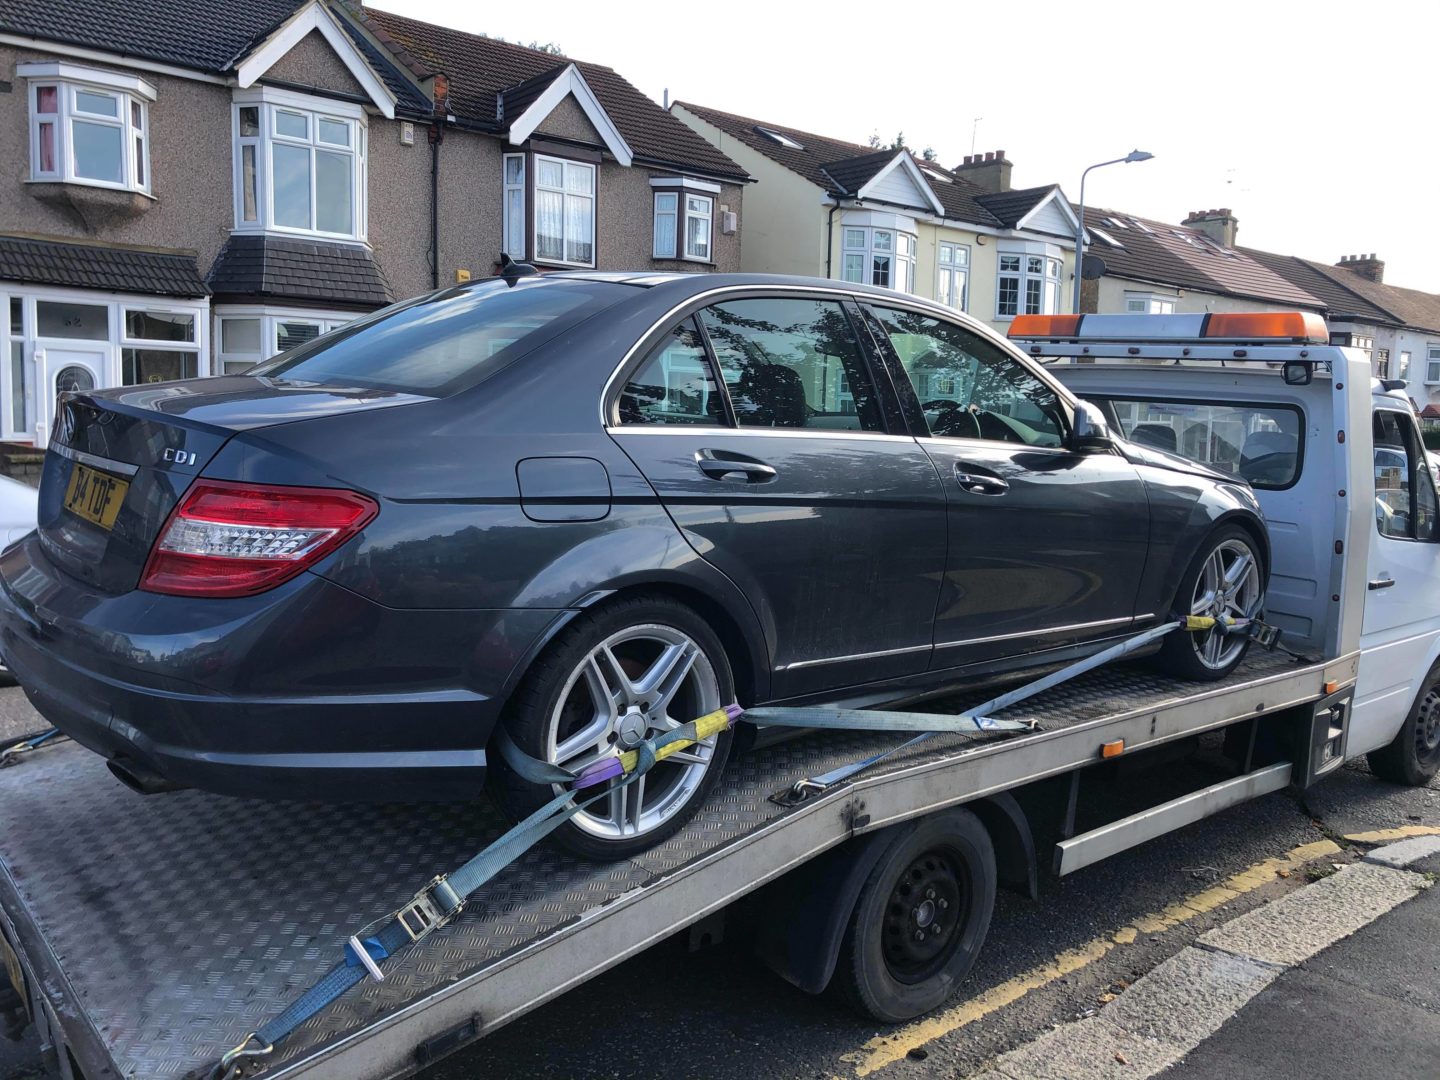 Car Recovery | East London Car and Van Recovery